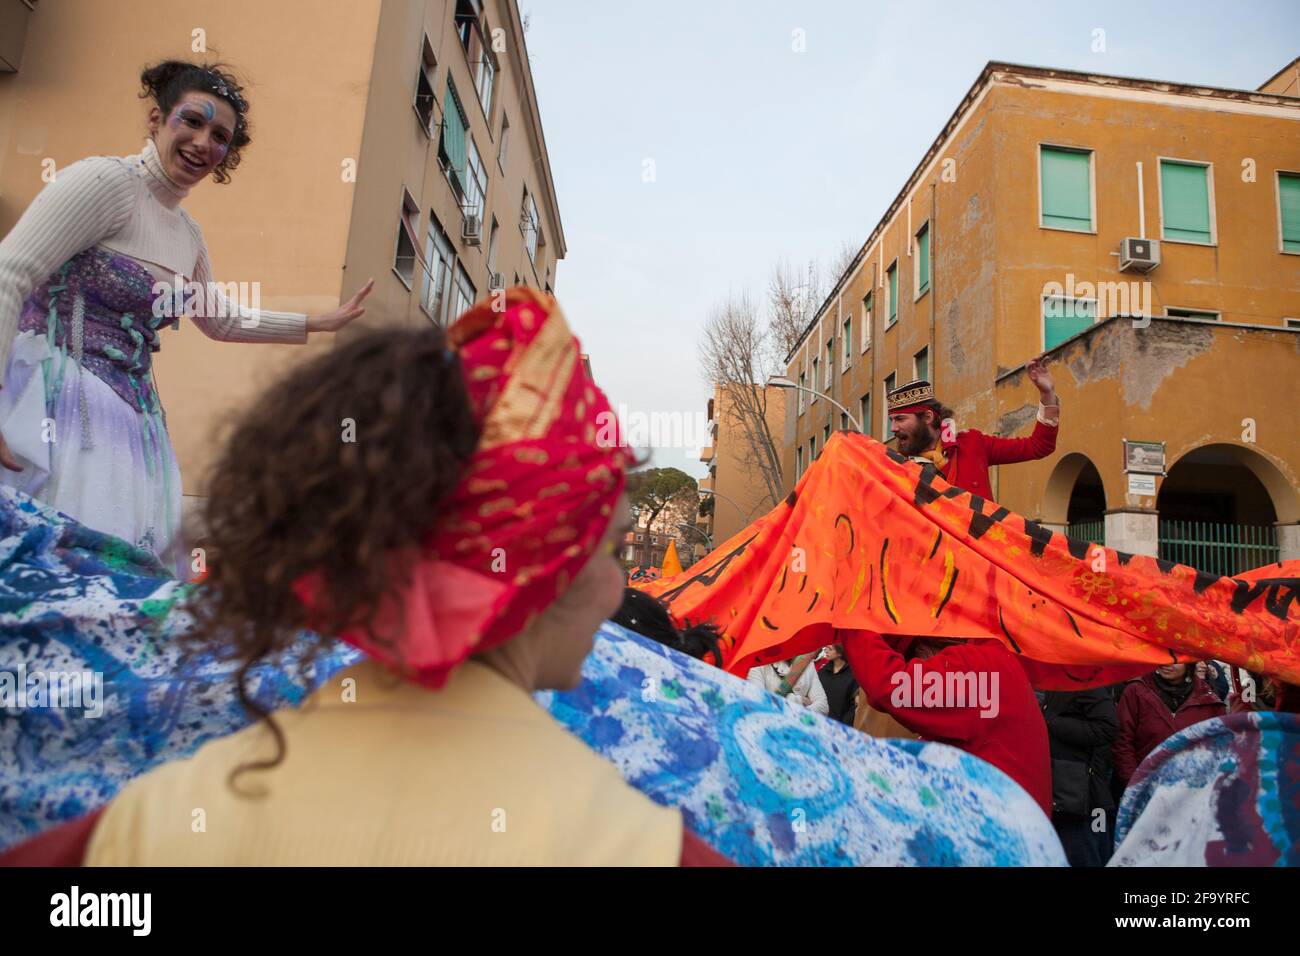 Every year in Rome, at the Garbatella district, during the event called Carnevale Liberato artists and jugglers perform in the streets. Rome 02 13 201 Stock Photo